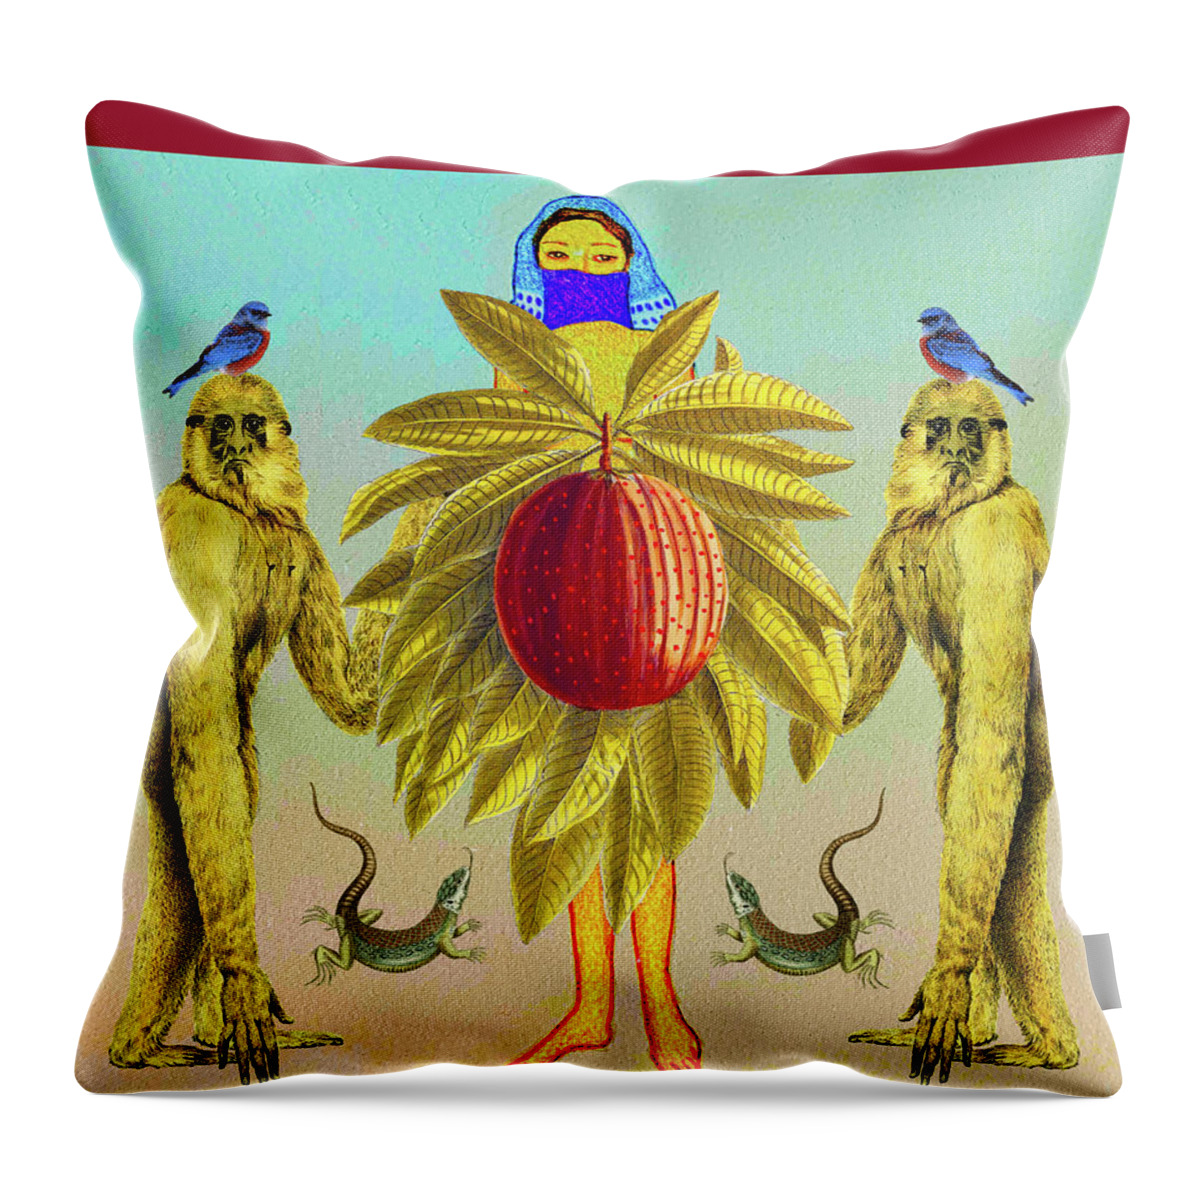 Zapote Throw Pillow featuring the digital art Red Zapote by Lorena Cassady